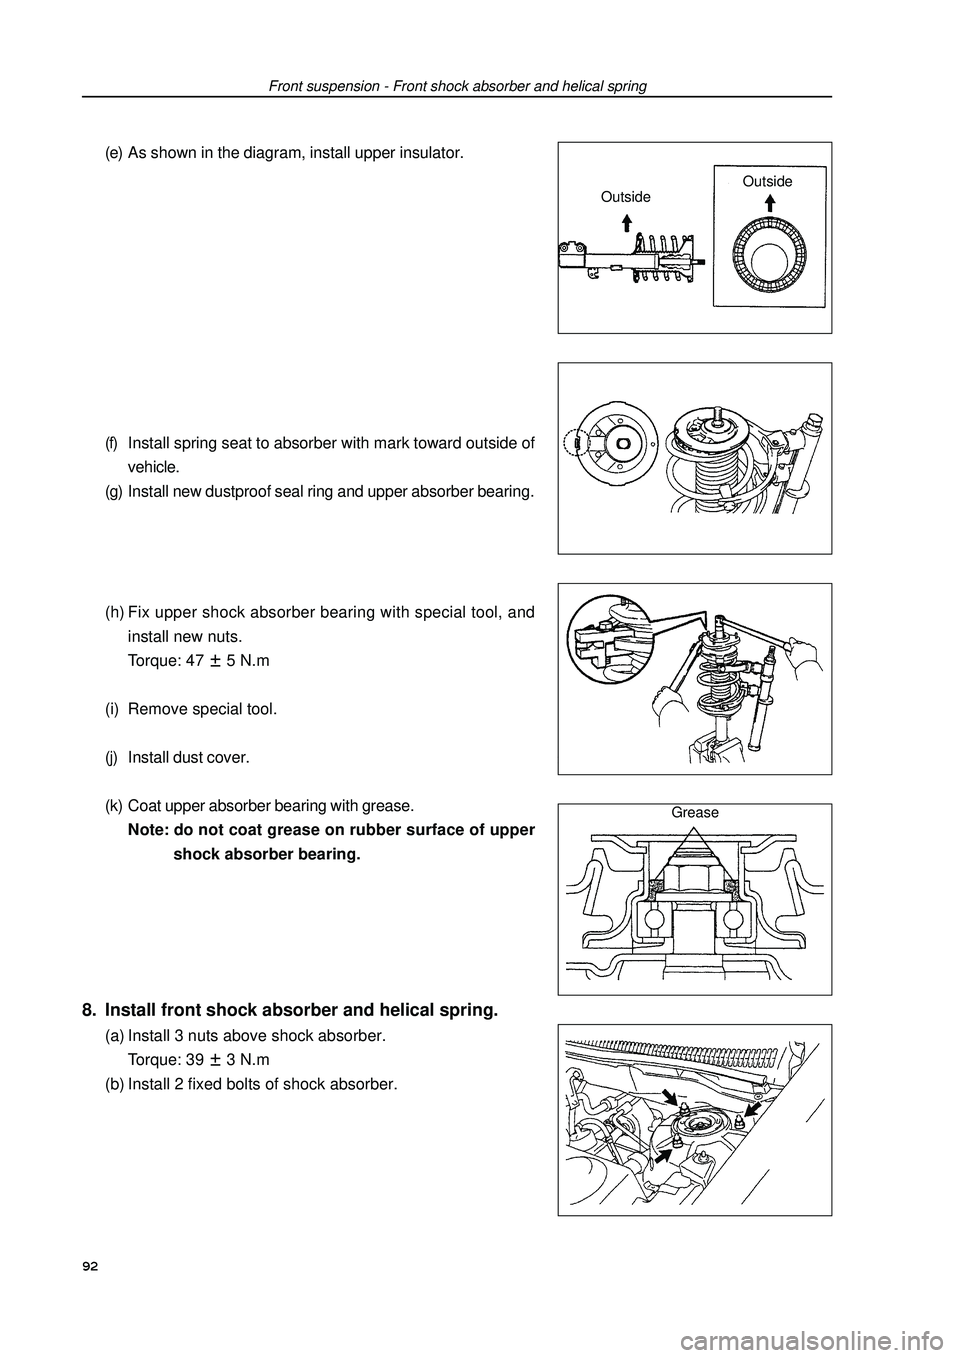 GEELY FC 2008  Workshop Manual Front suspension - Front shock absorber and helical spring(e) As shown in the diagram, install upper insulator.
(f) Install spring seat to absorber with mark toward outside of
vehicle.
(g) Install new